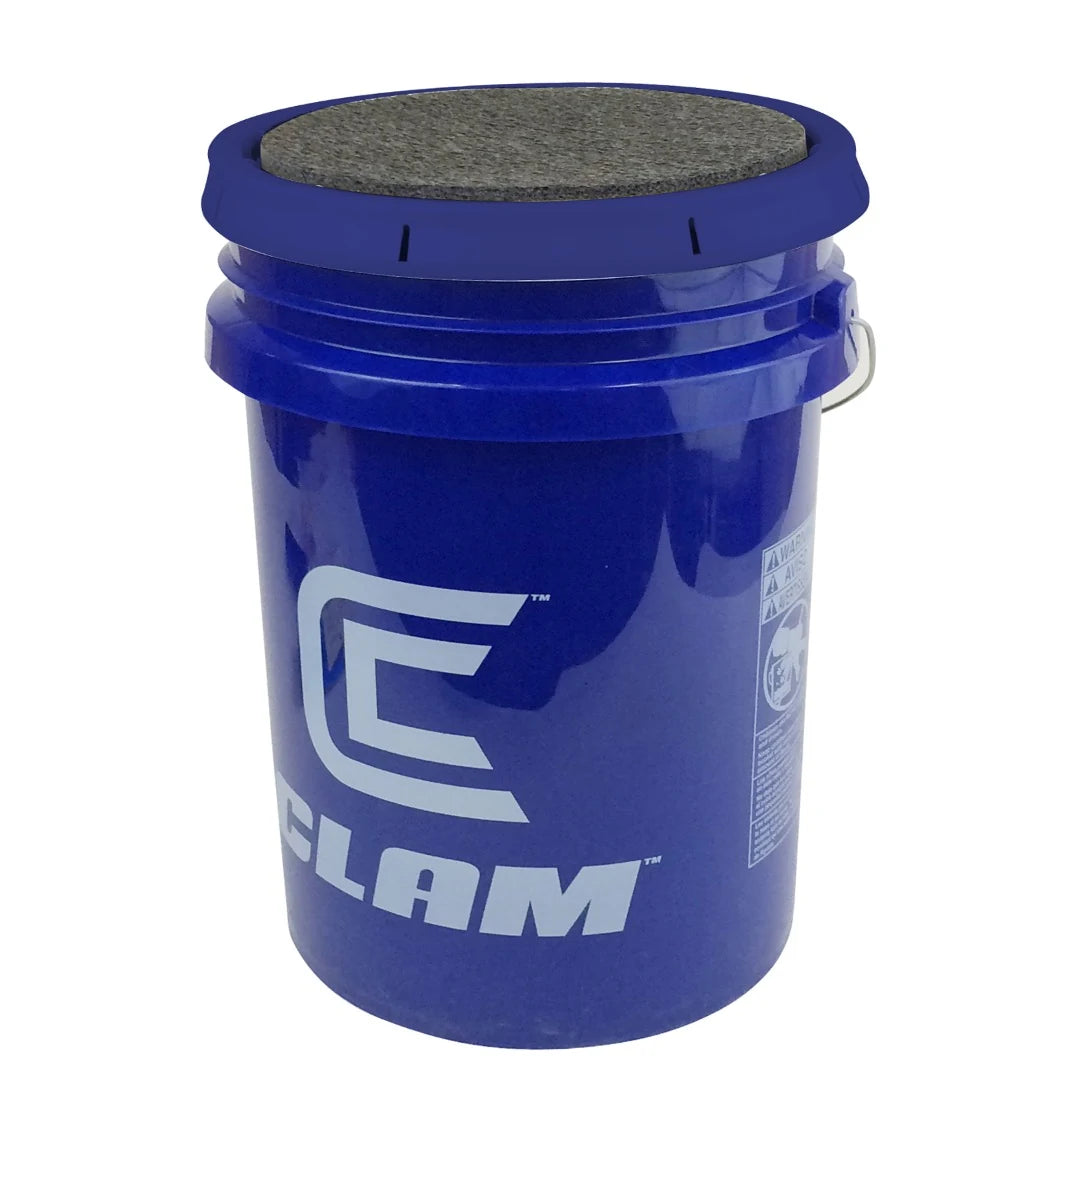 CLam 6 Gallon Bucket with Lid